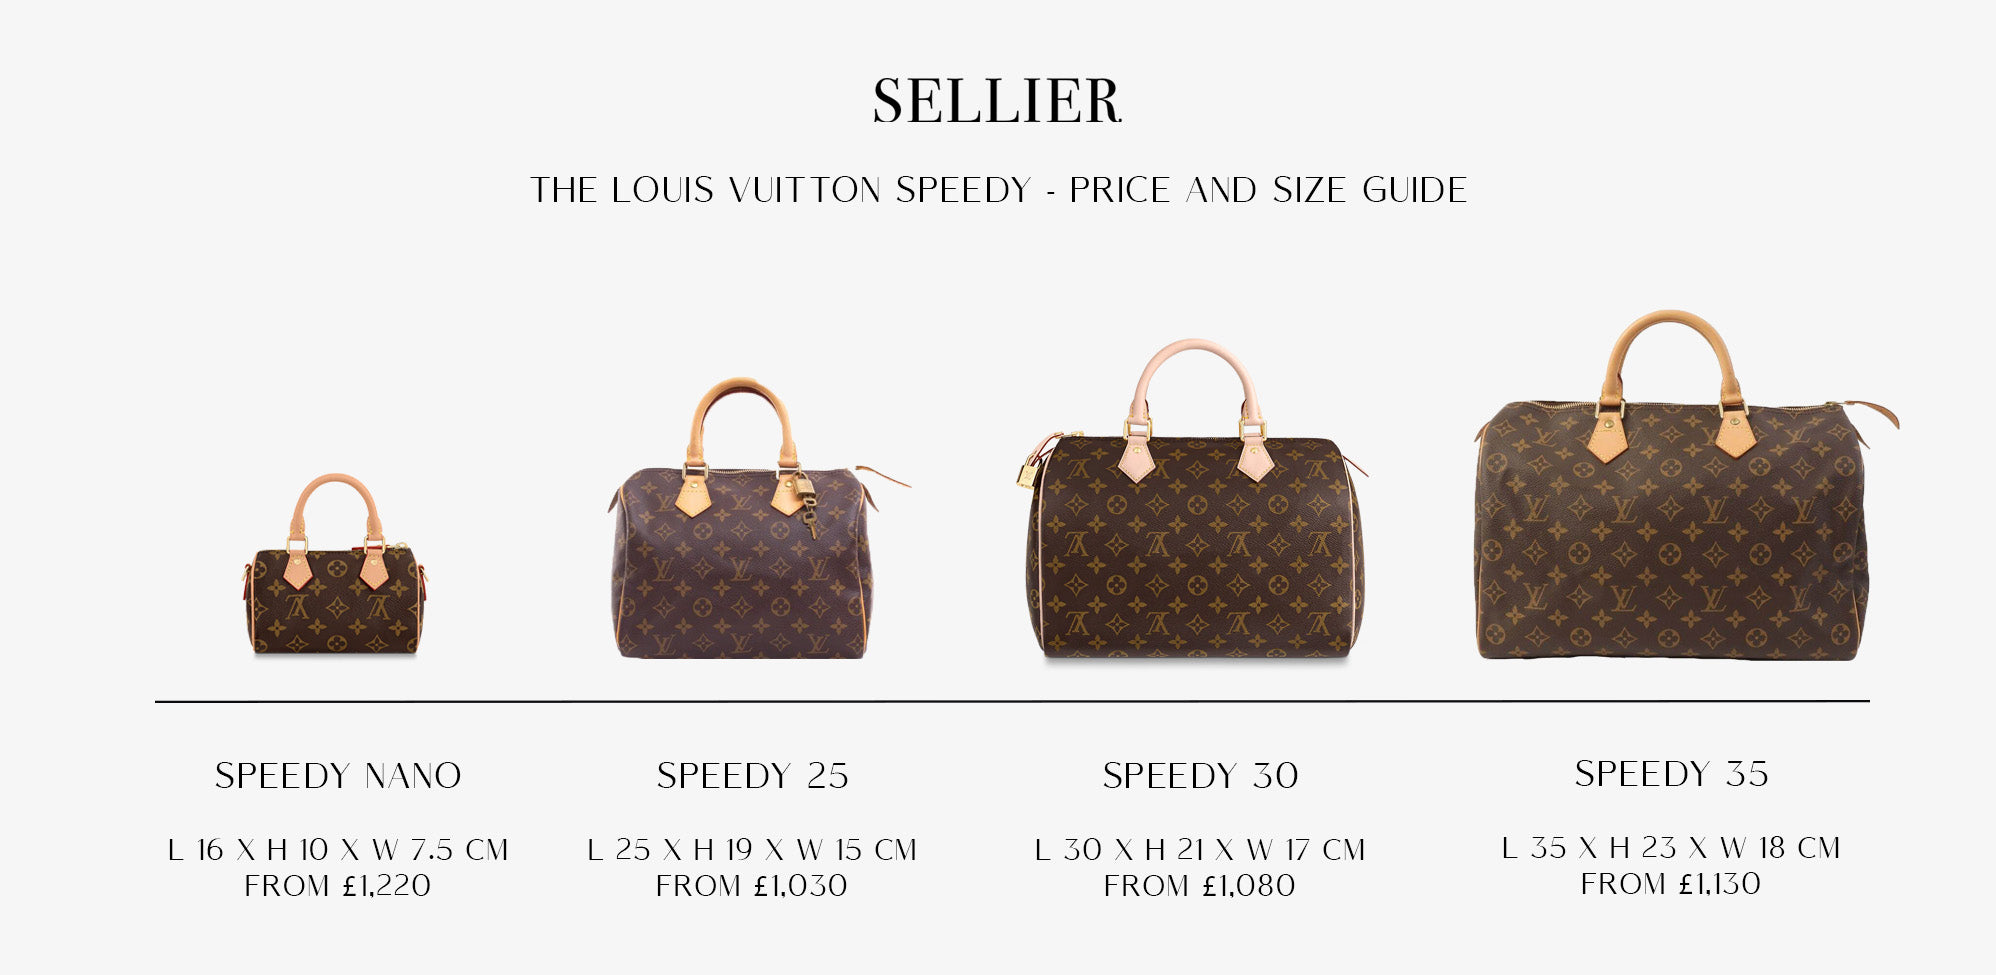 8 TIPS FOR AUTHENTICATING LOUIS VUITTON HANDBAGS